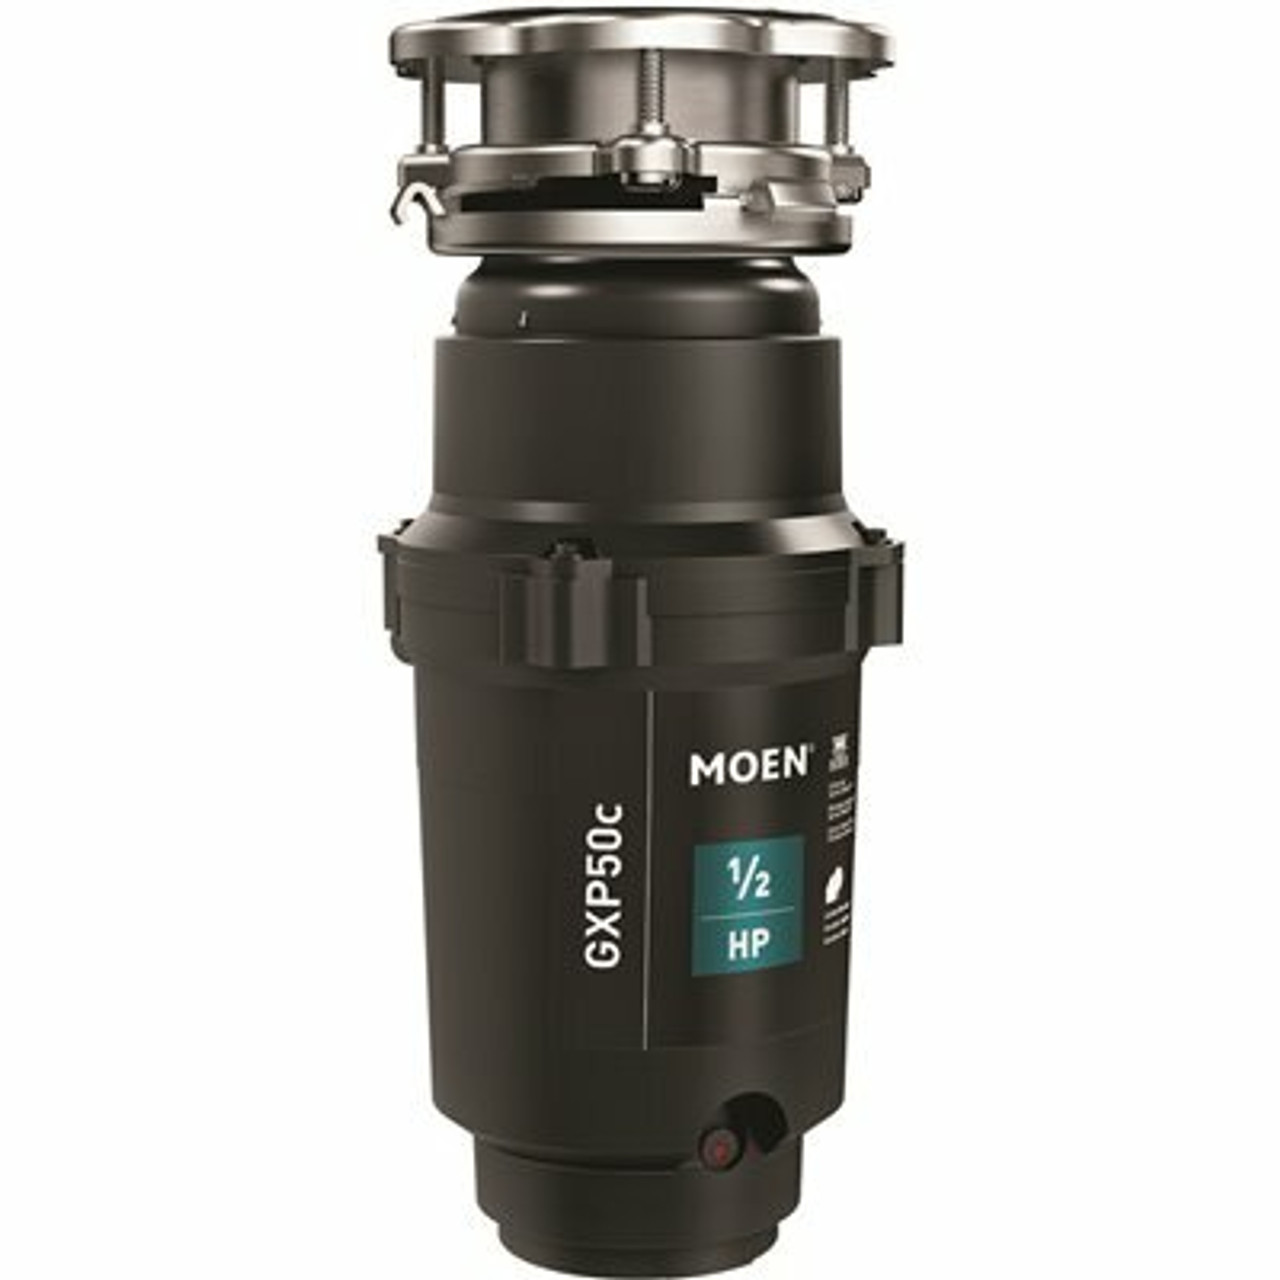 Moen Prep Series 1/2 Hp Continuous Feed Garbage Disposal With Power Cord And Universal Mount